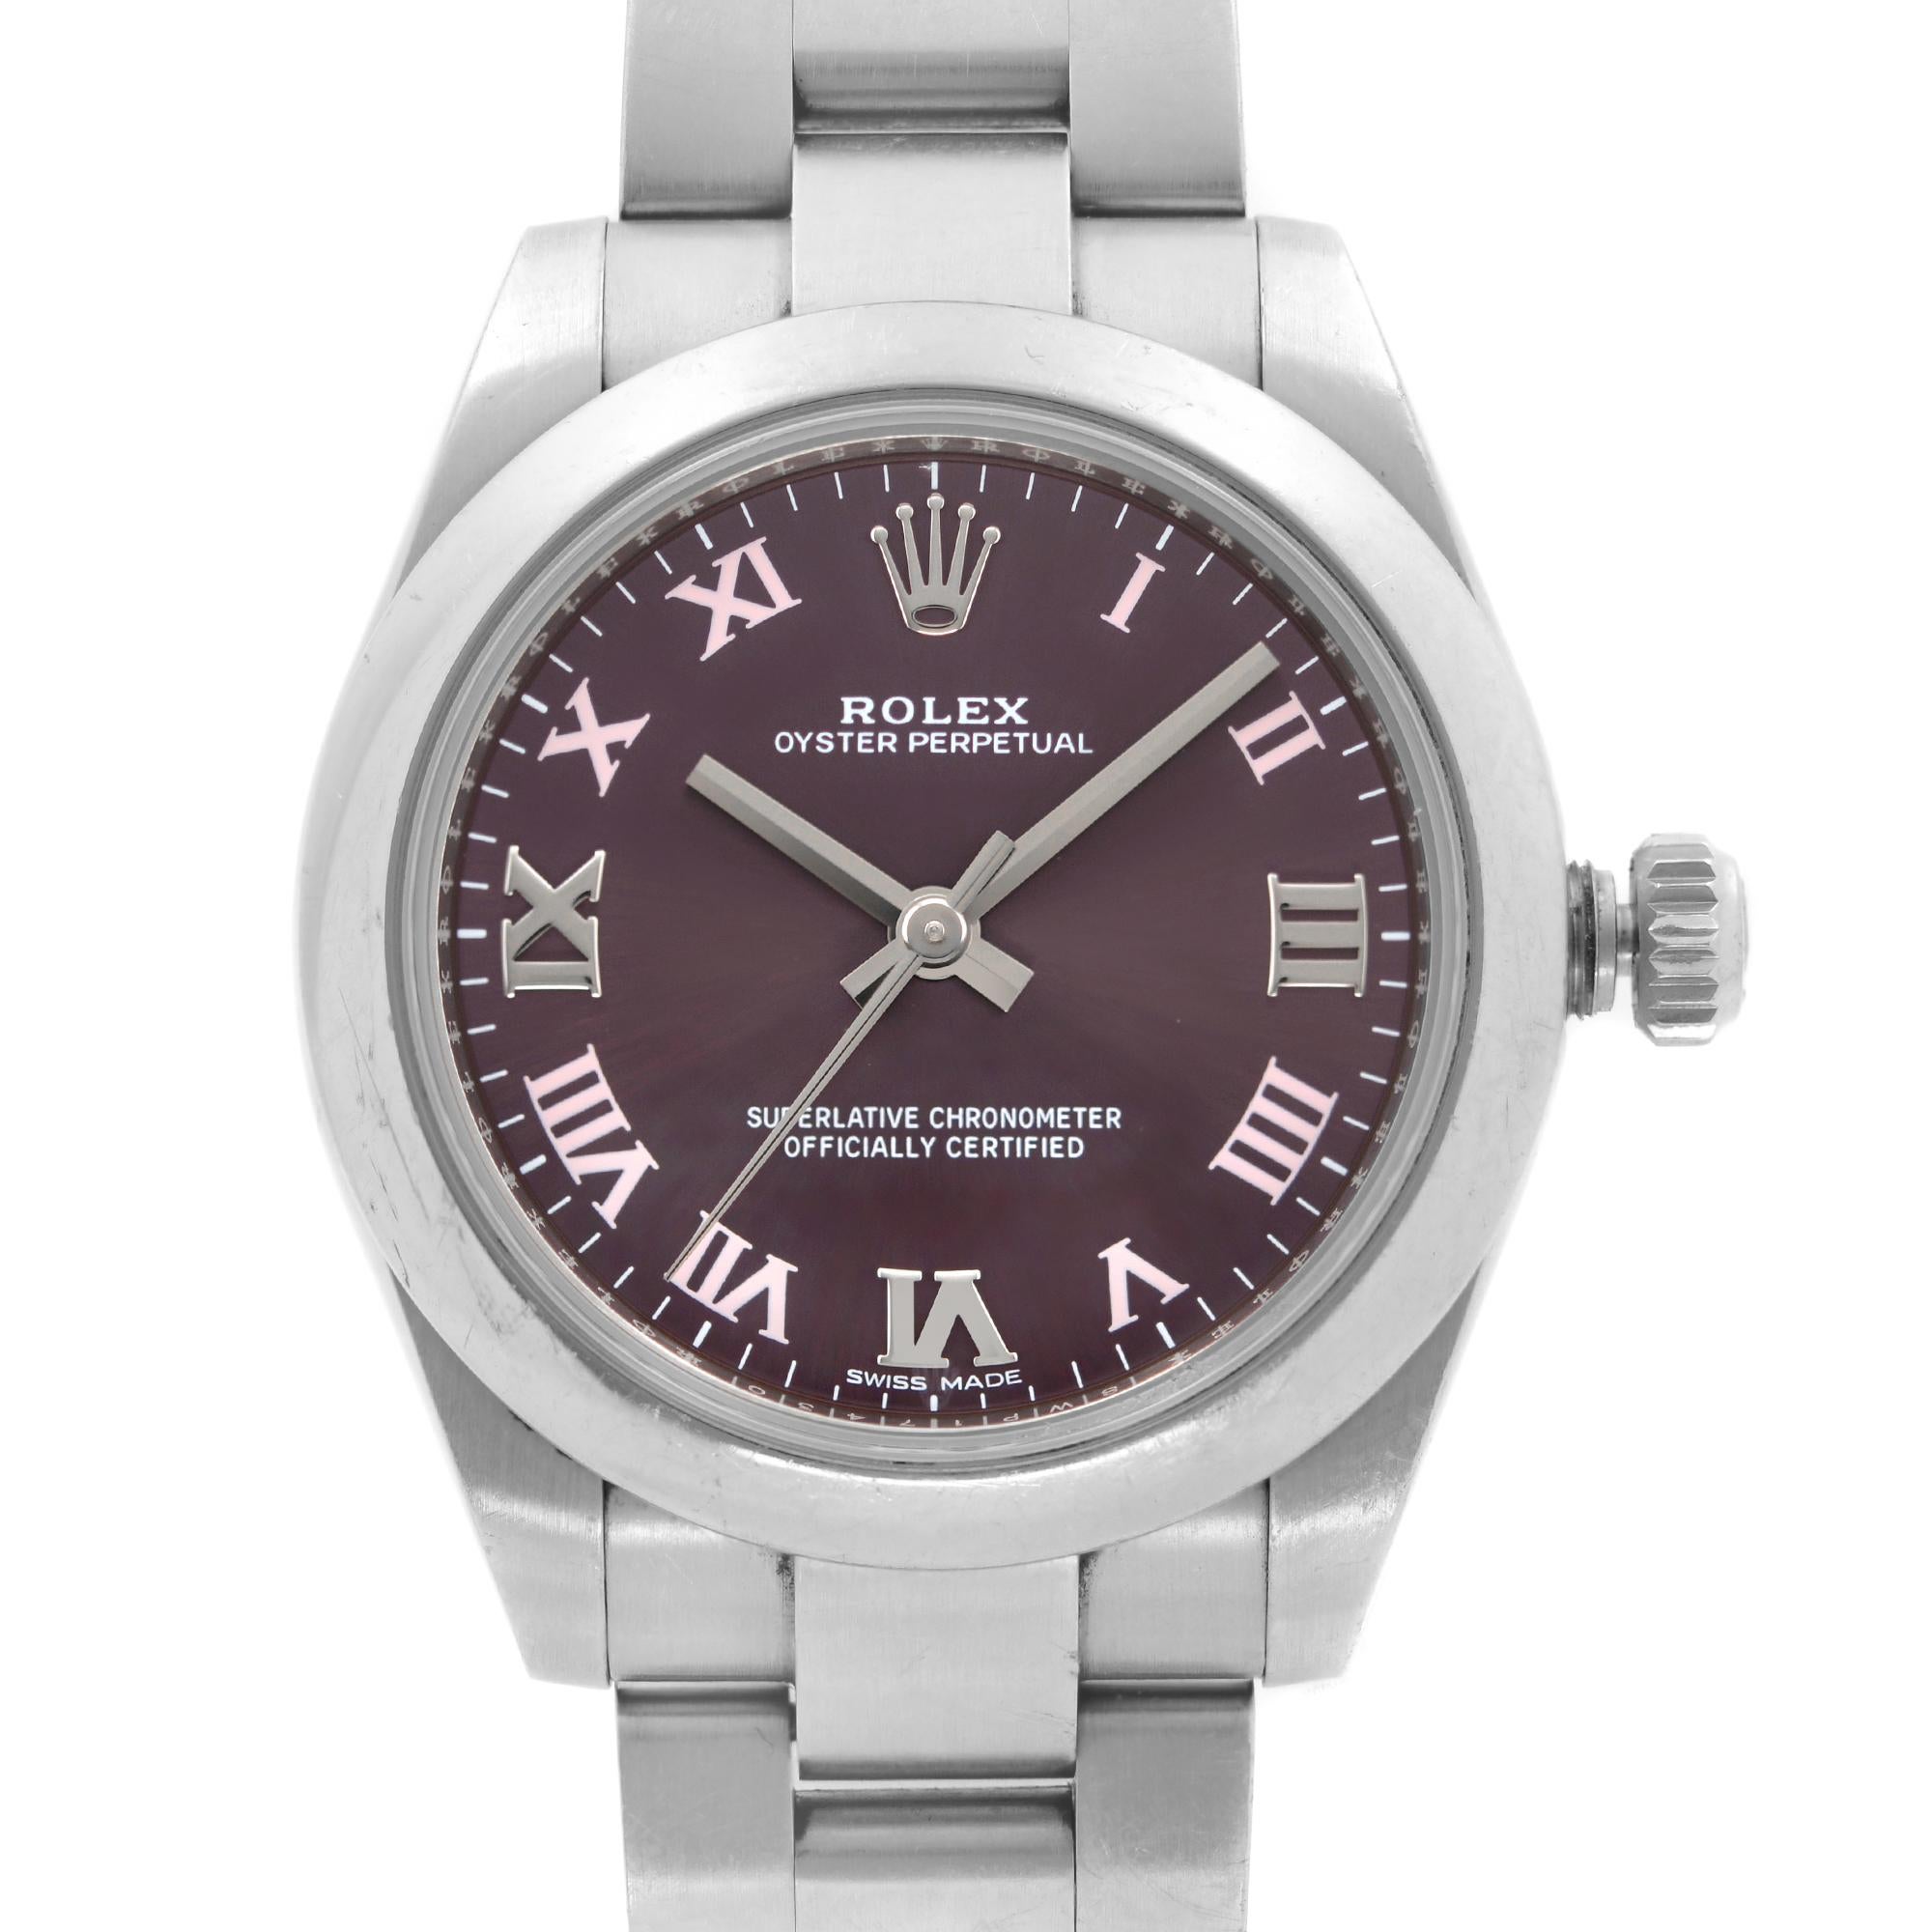 Pre-owned Rolex Oyster Perpetual No-Date 31 mm Steel Red Grape Dial Automatic Ladies Watch 177200GR. No Original Box and Papers are Included. Comes with Chronostore Presentation Box and Authenticity Card. Covered by 1-year Chronostore Warranty.